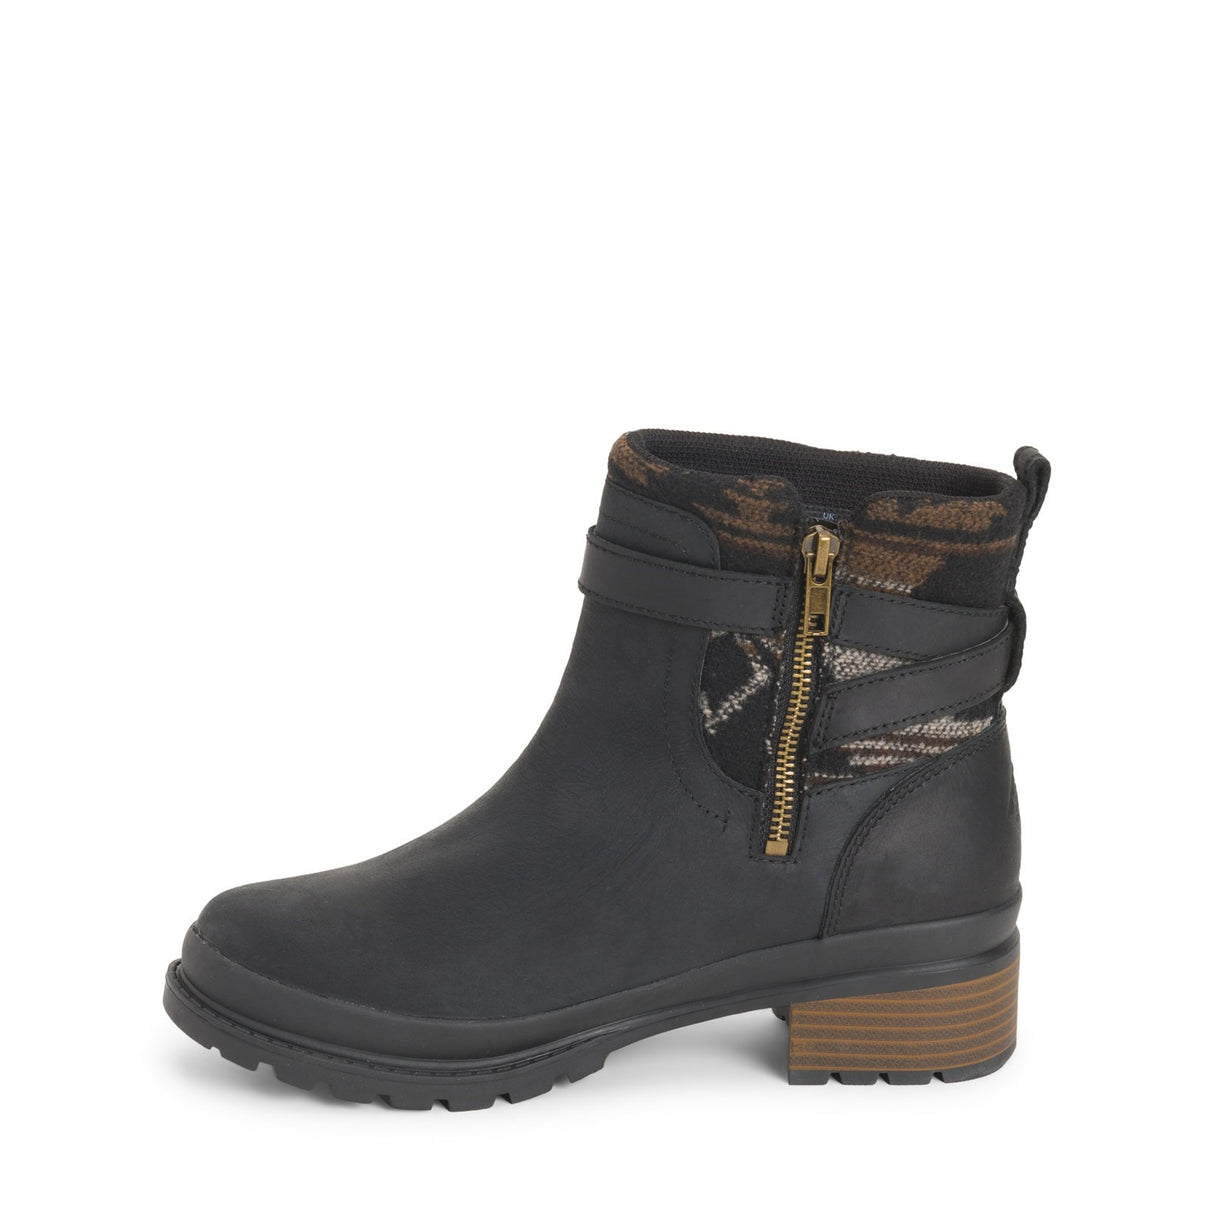 Muck Boot Liberty Ankle Supreme Stiefel